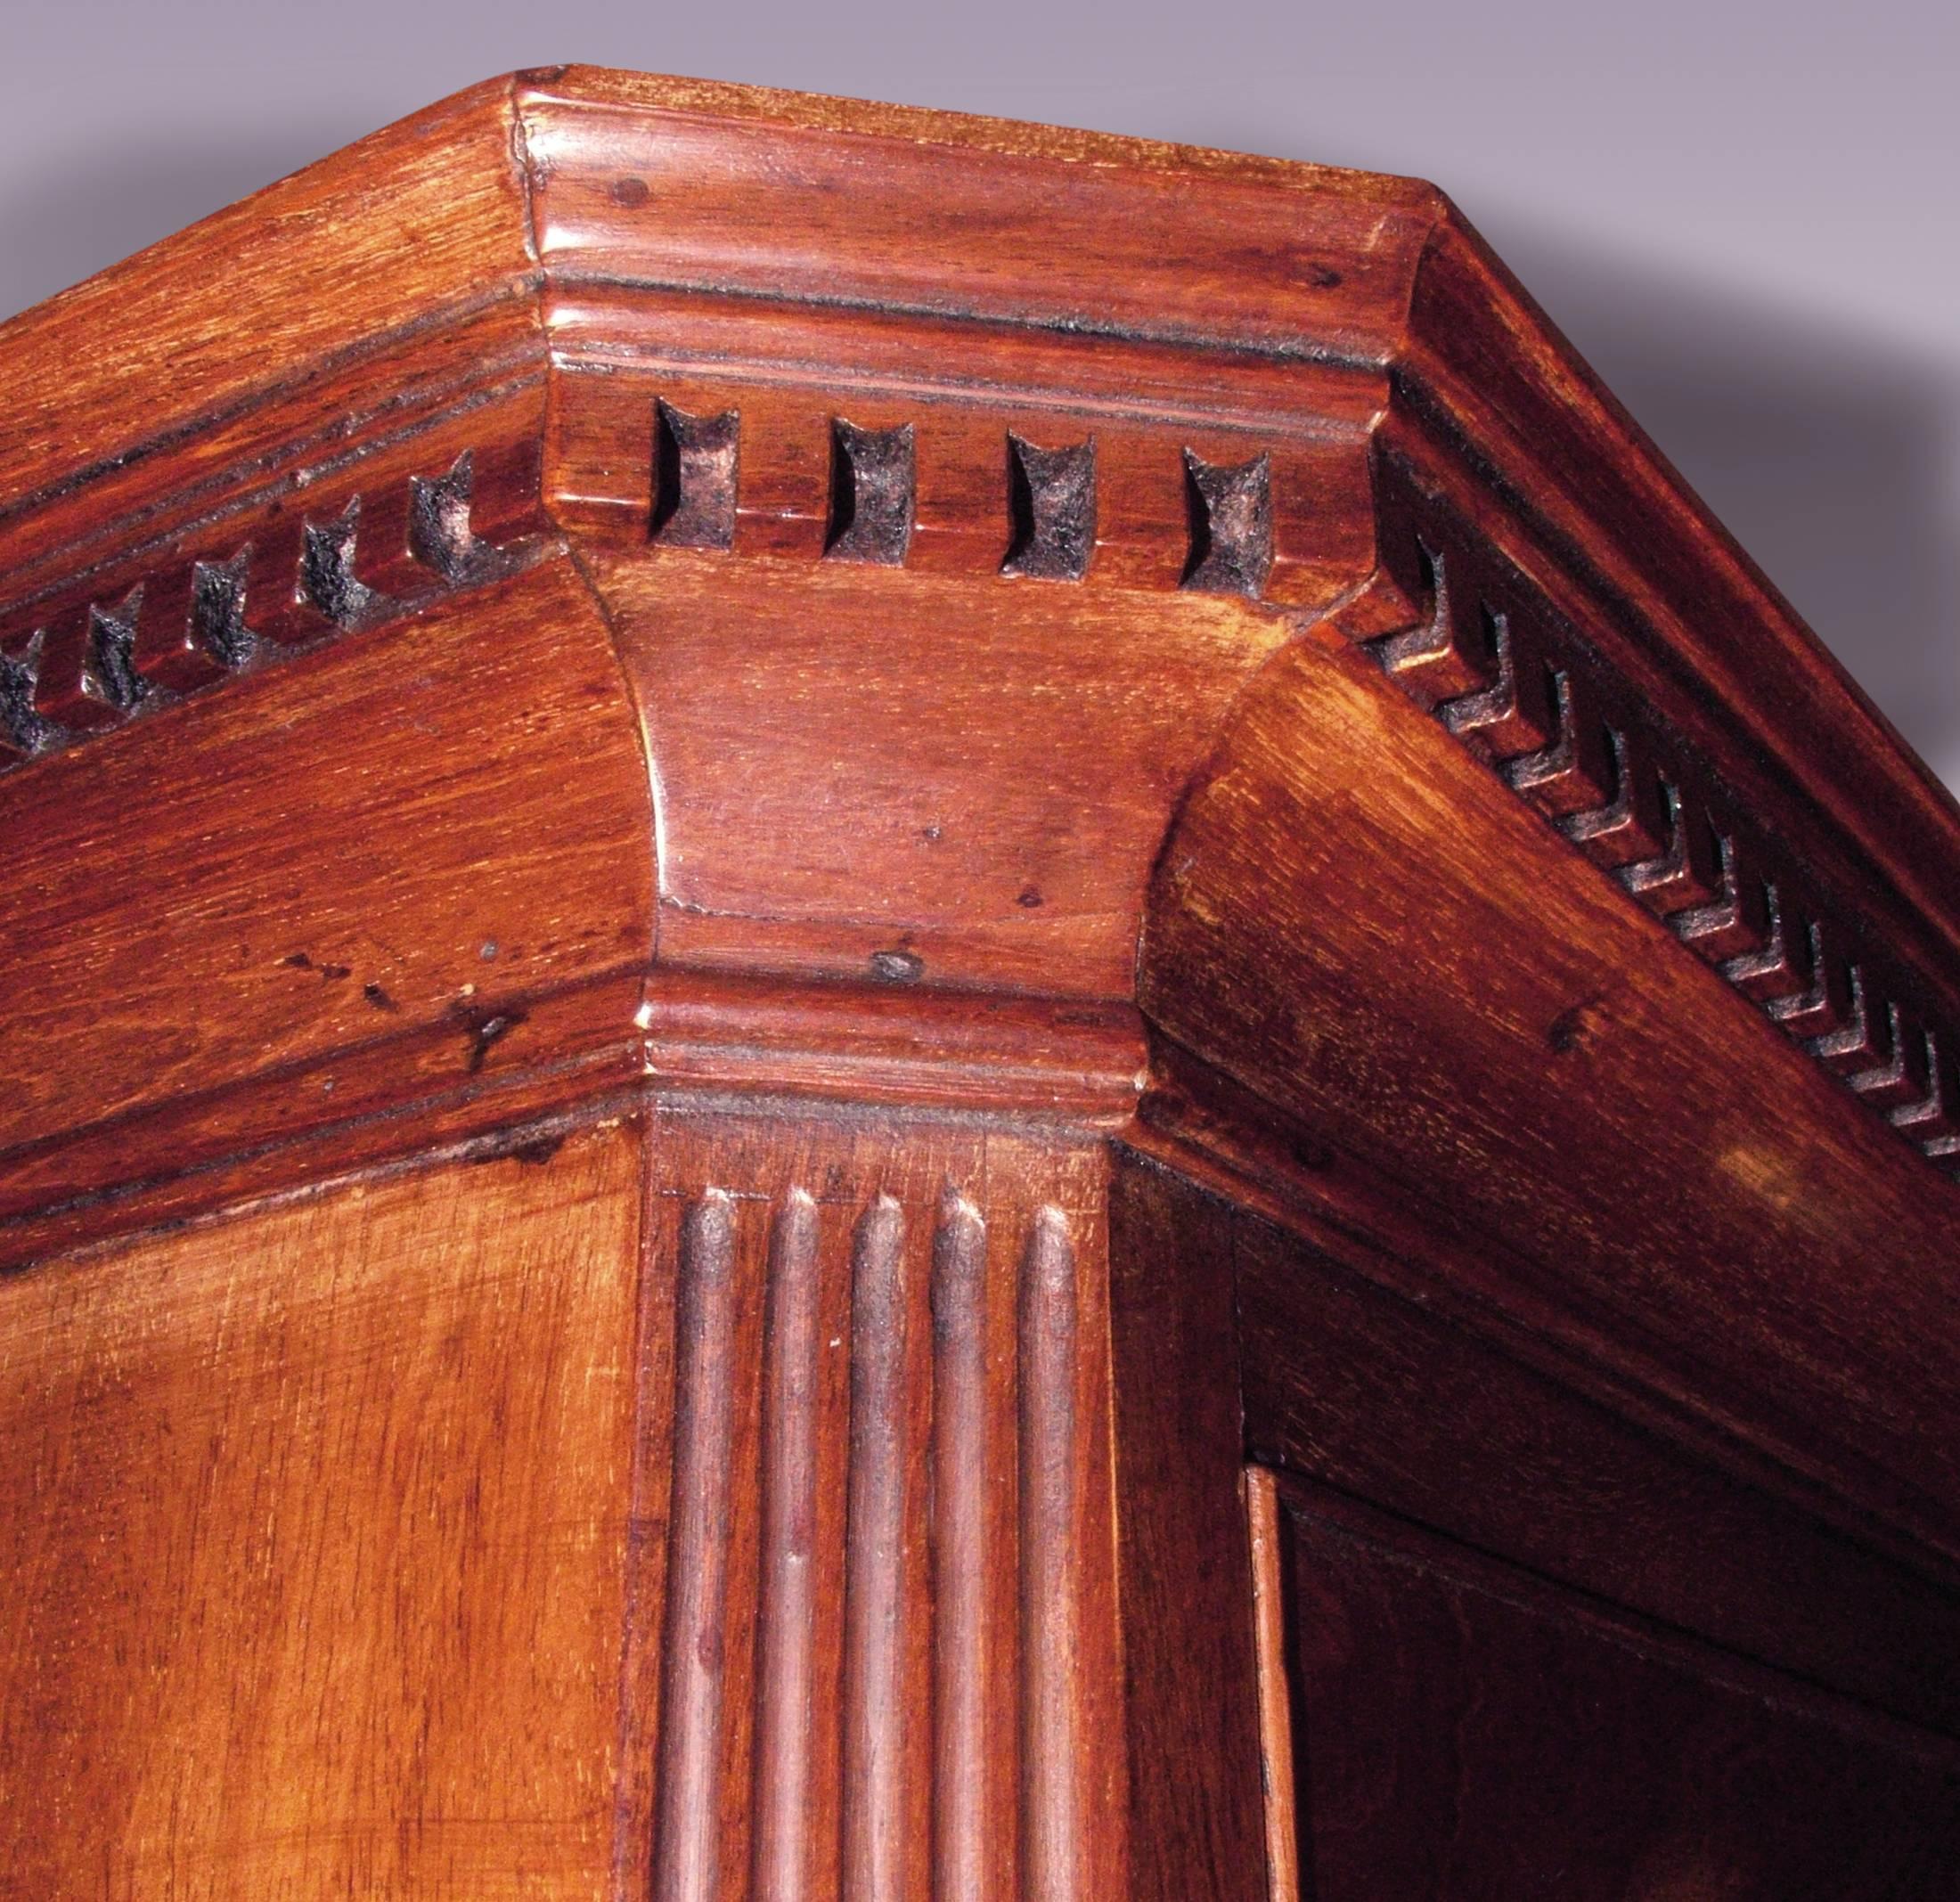 A fine quality mid-18th century well-figured mahogany tallboy, having canted cornered dentil moulded cornice above 2 short and 6 long cockbeaded drawers retaining original gilt-brass Rococo handles. The Tallboy with stop-fluted canted corners